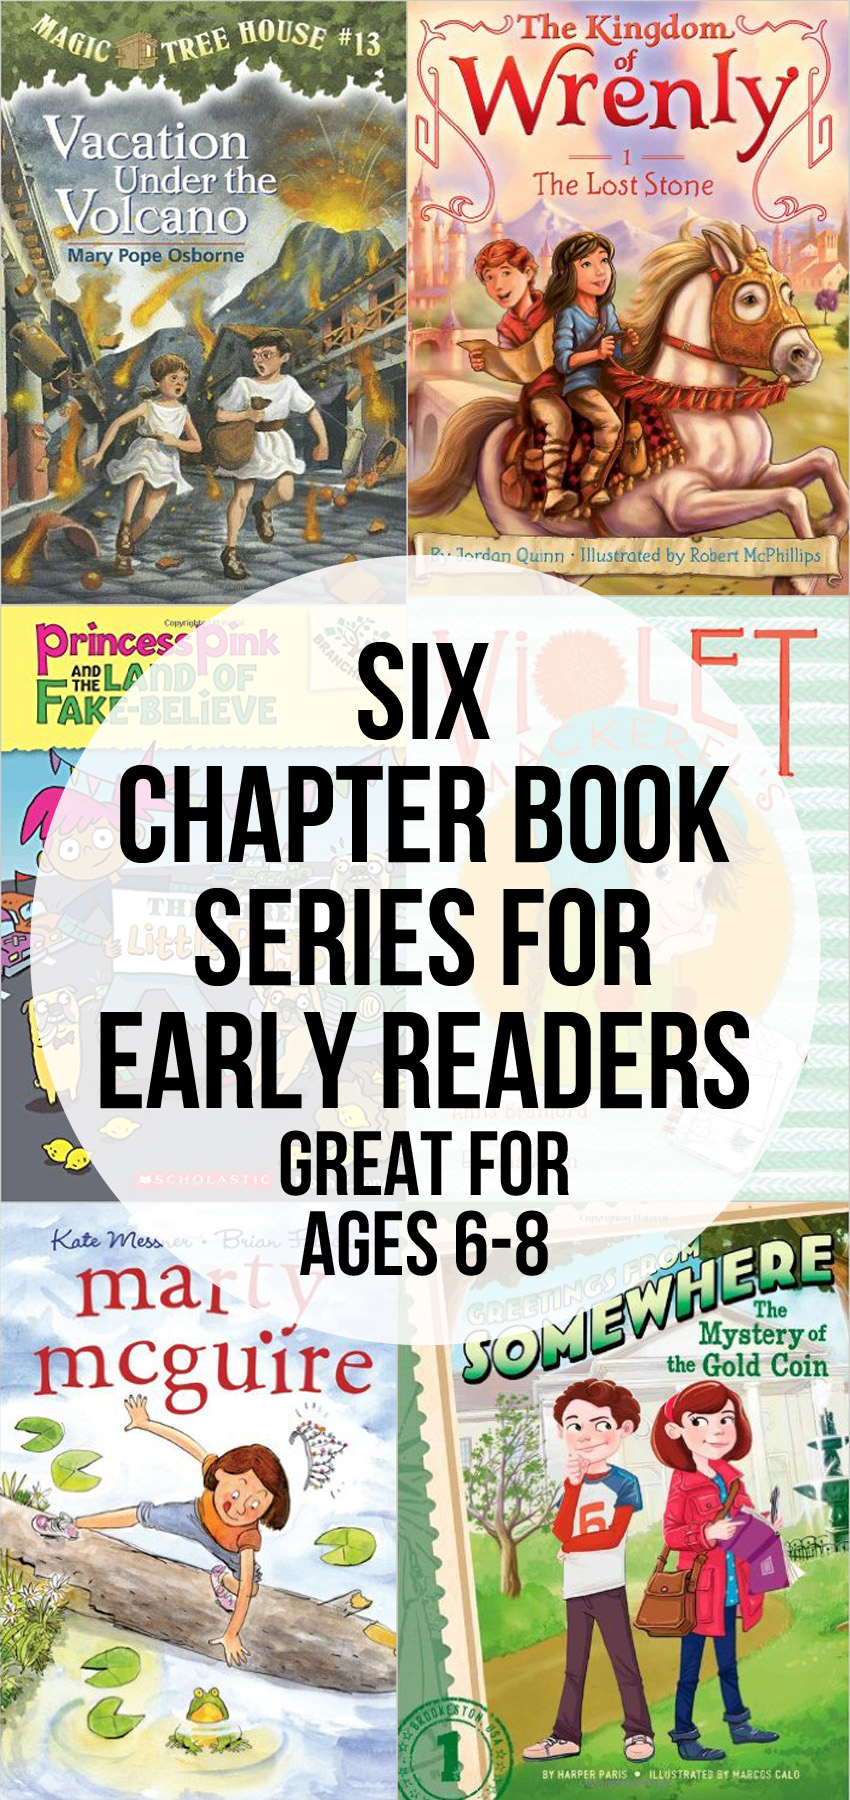 Six Chapter Book Series for Early Readers - perfect for those ages 6-8